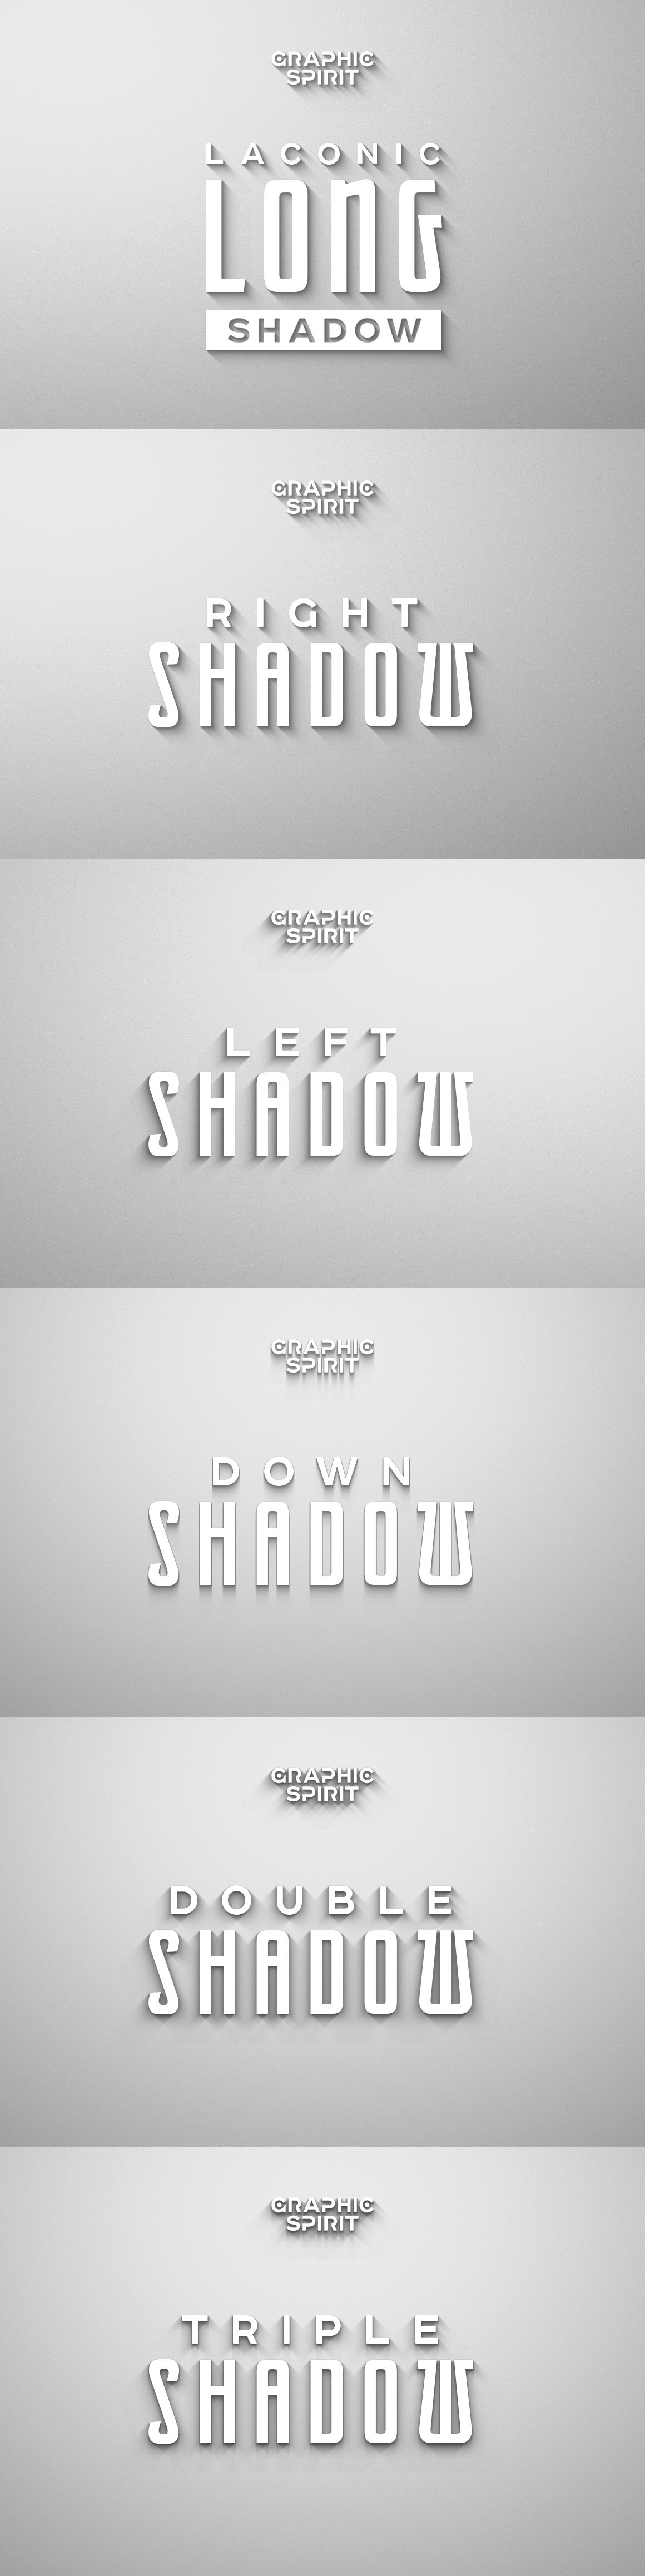 laconic long shadow for photoshop 0 388